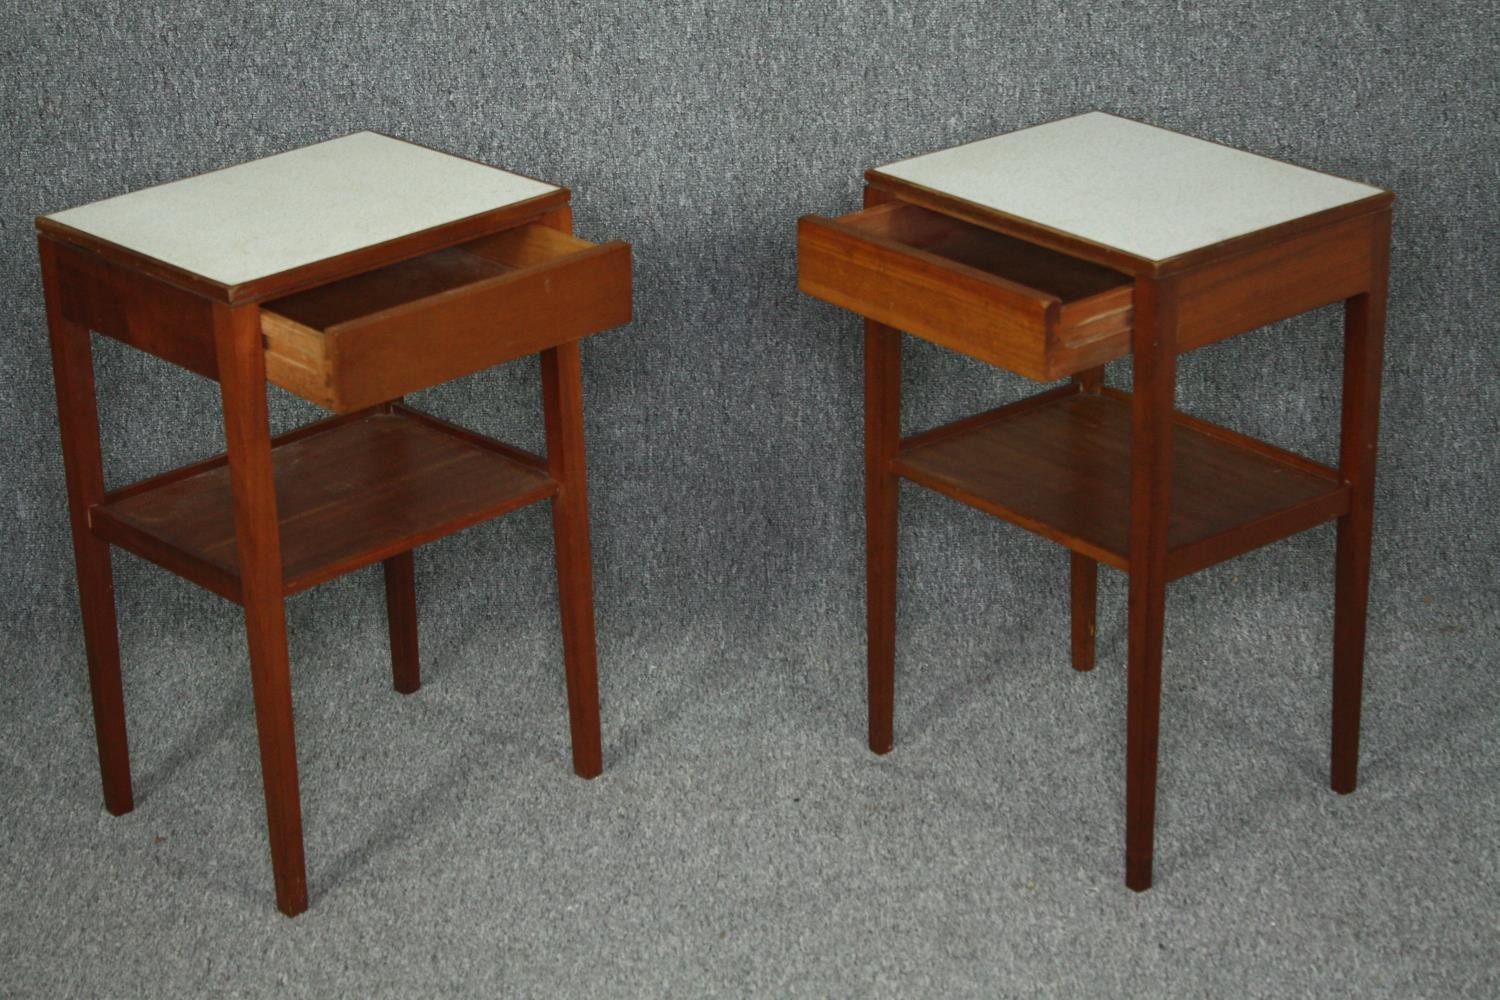 Bedside tables, a pair, mid century teak with composite laminated tops. H.61 W.38 D.31cm. (each). - Image 3 of 7